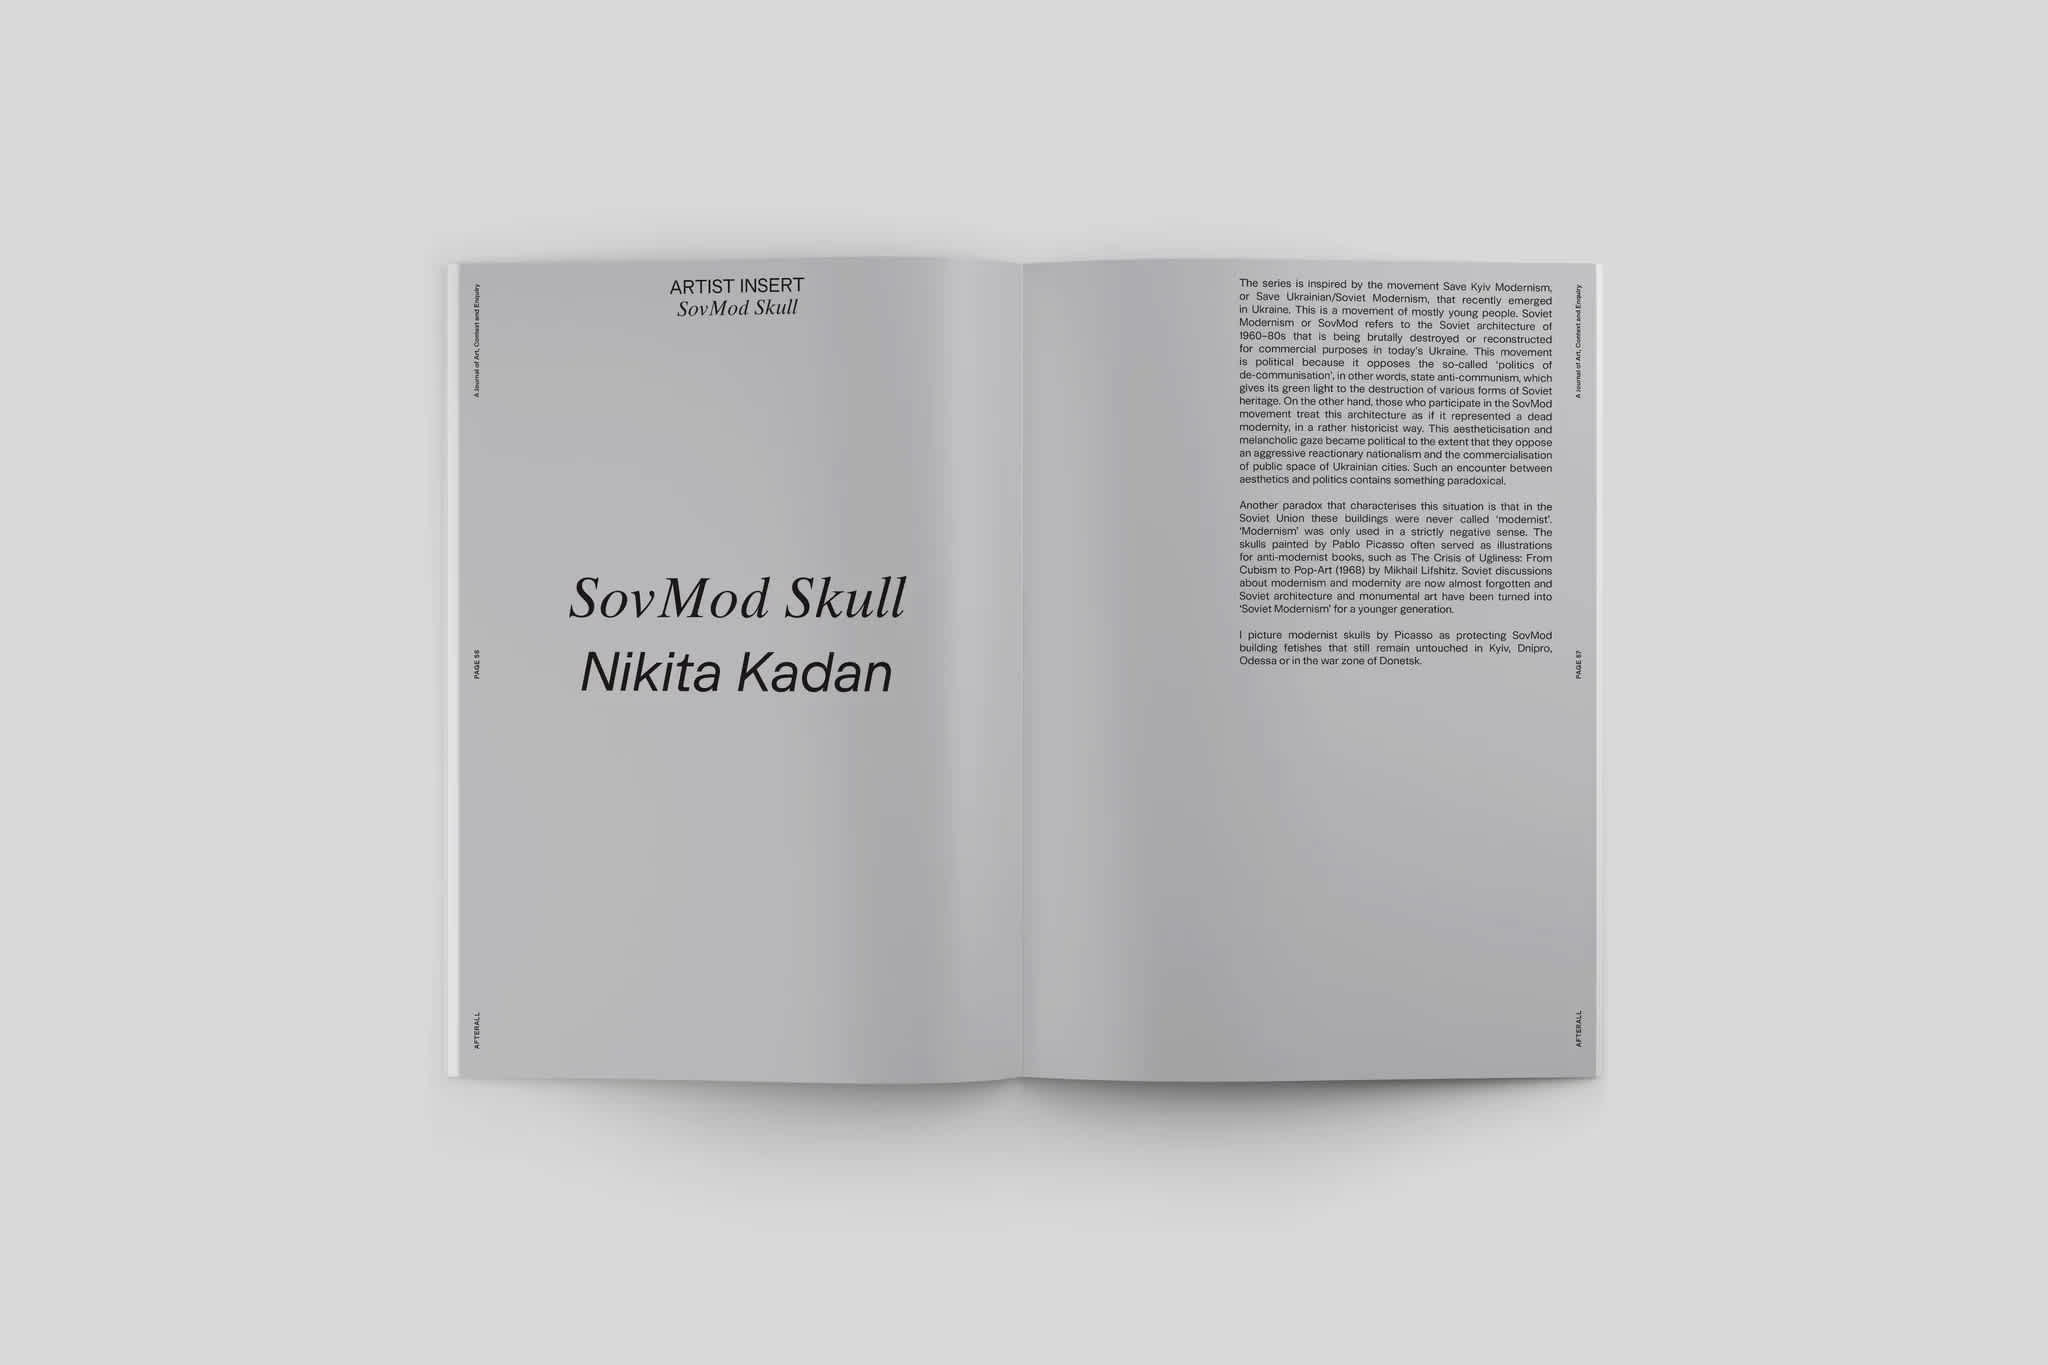 Open magazine. The essay title is centered on the left page. Essay text sits in the top right corner of the right page. 